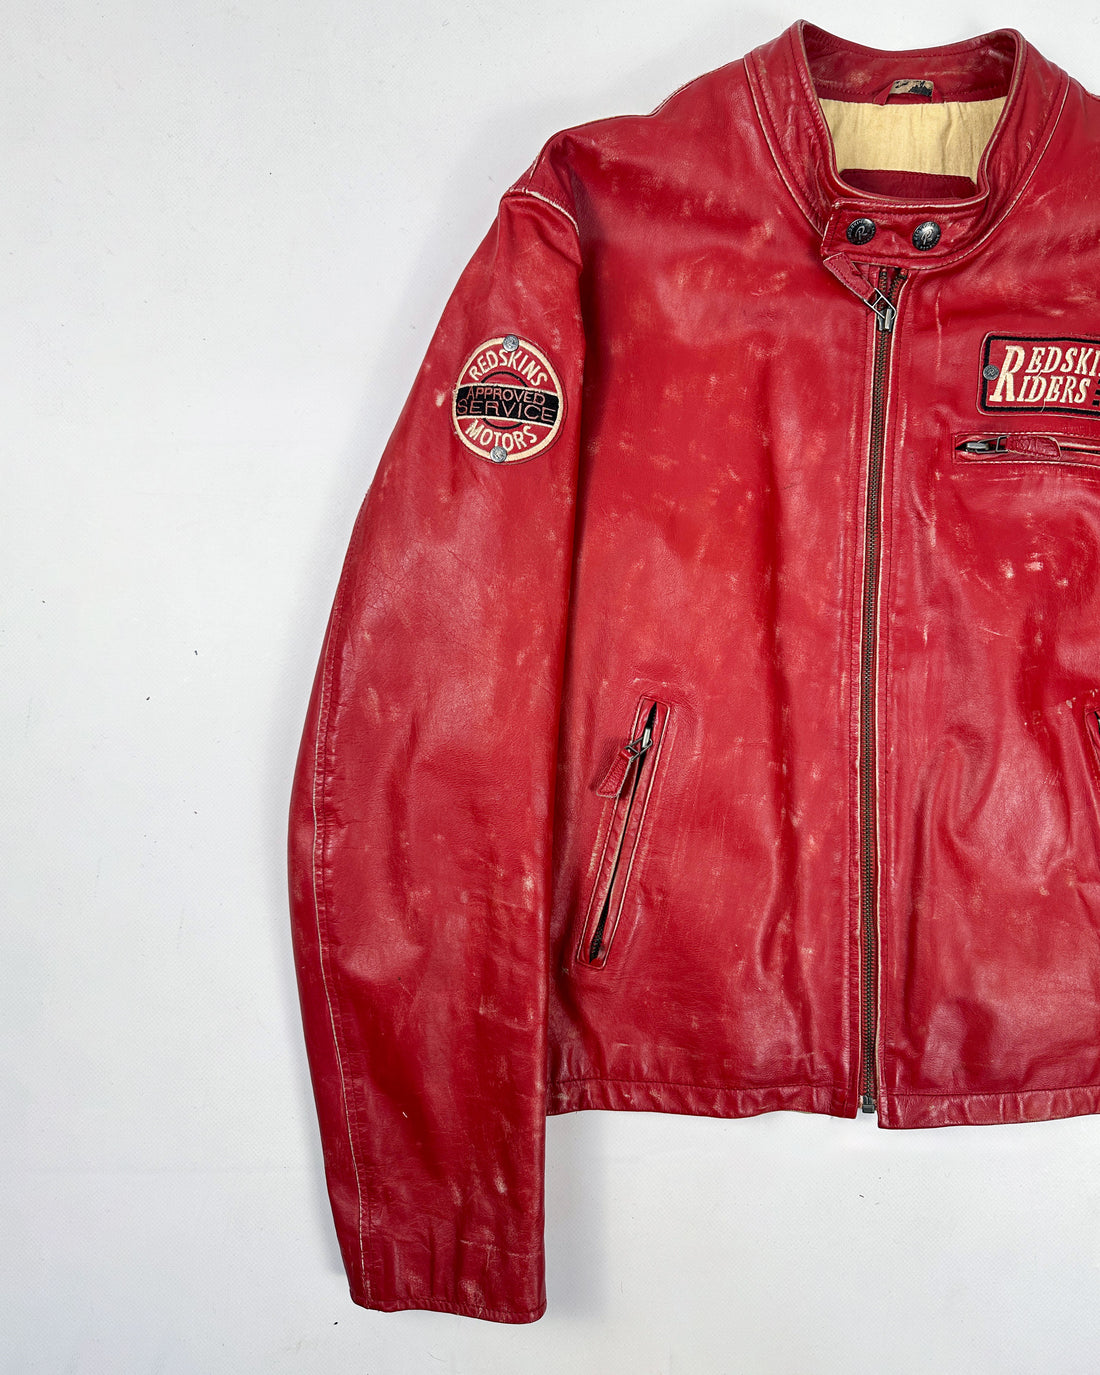 Redskins Red DIstressed Racing Leather Jacket 1990's